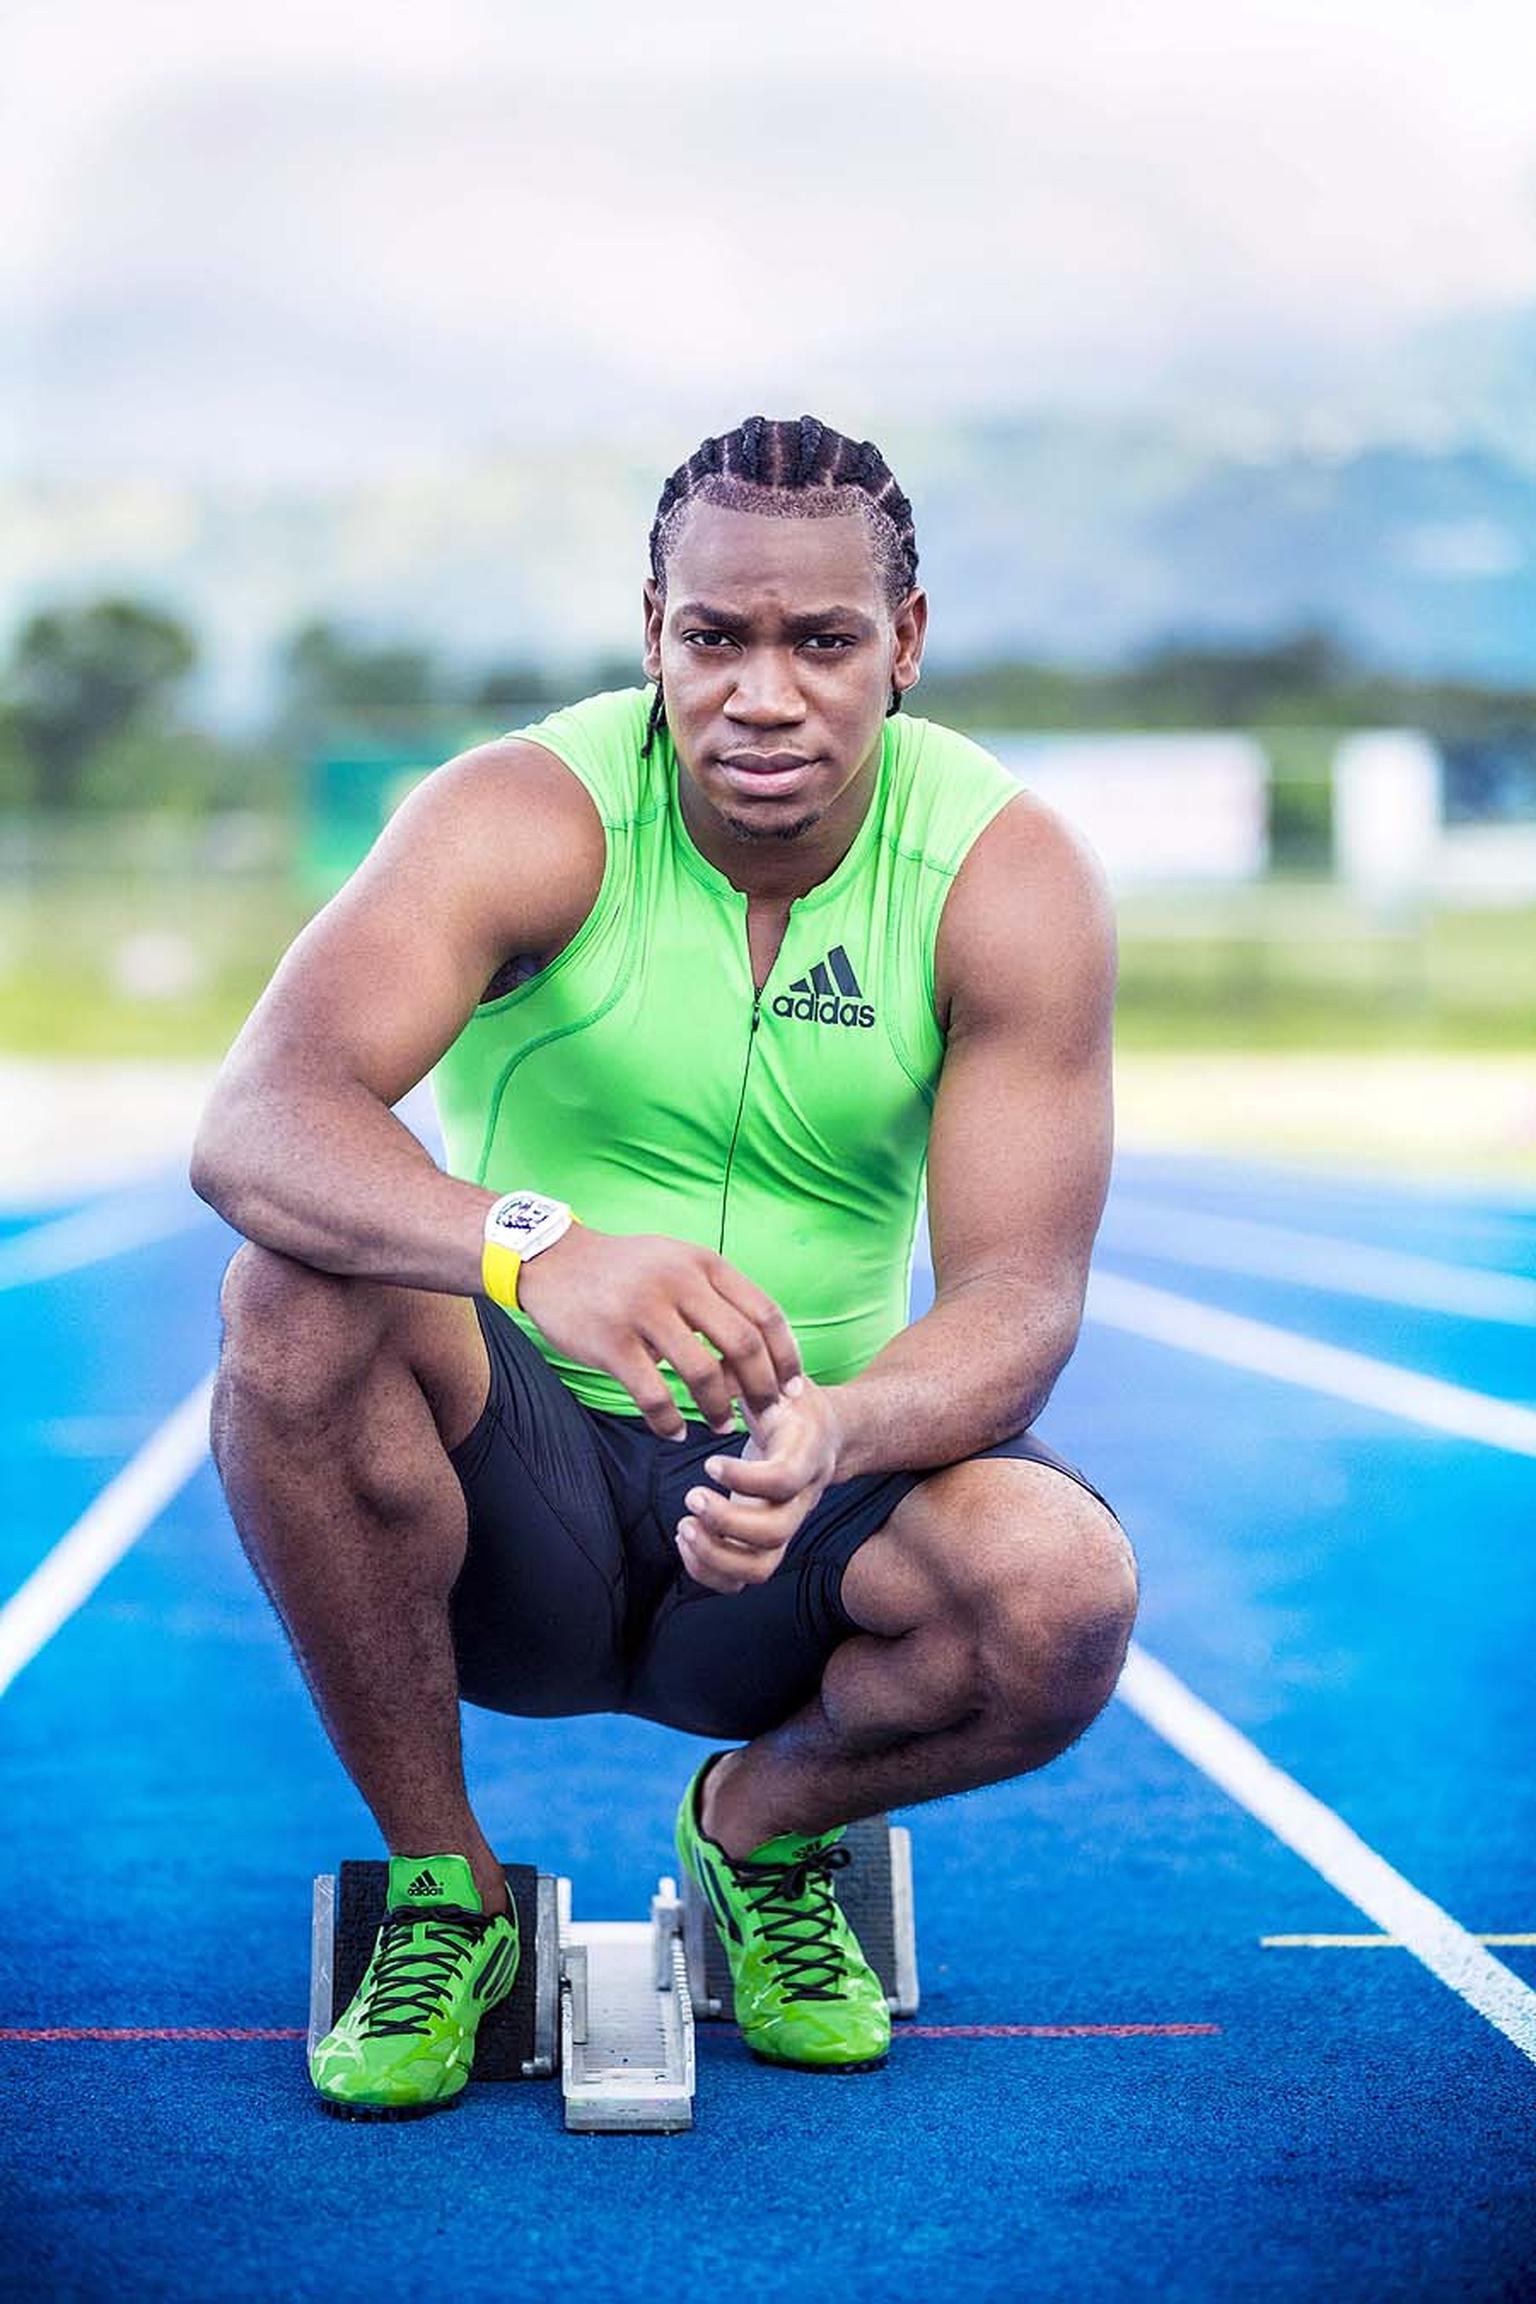 Yohan Blake wore a prototype of the RM 59-01 Tourbillon Yohan Blake watch throughout the London 2012 Olympic Games. It gained an enormous amount of media attention for its Jamaican flag colour scheme.